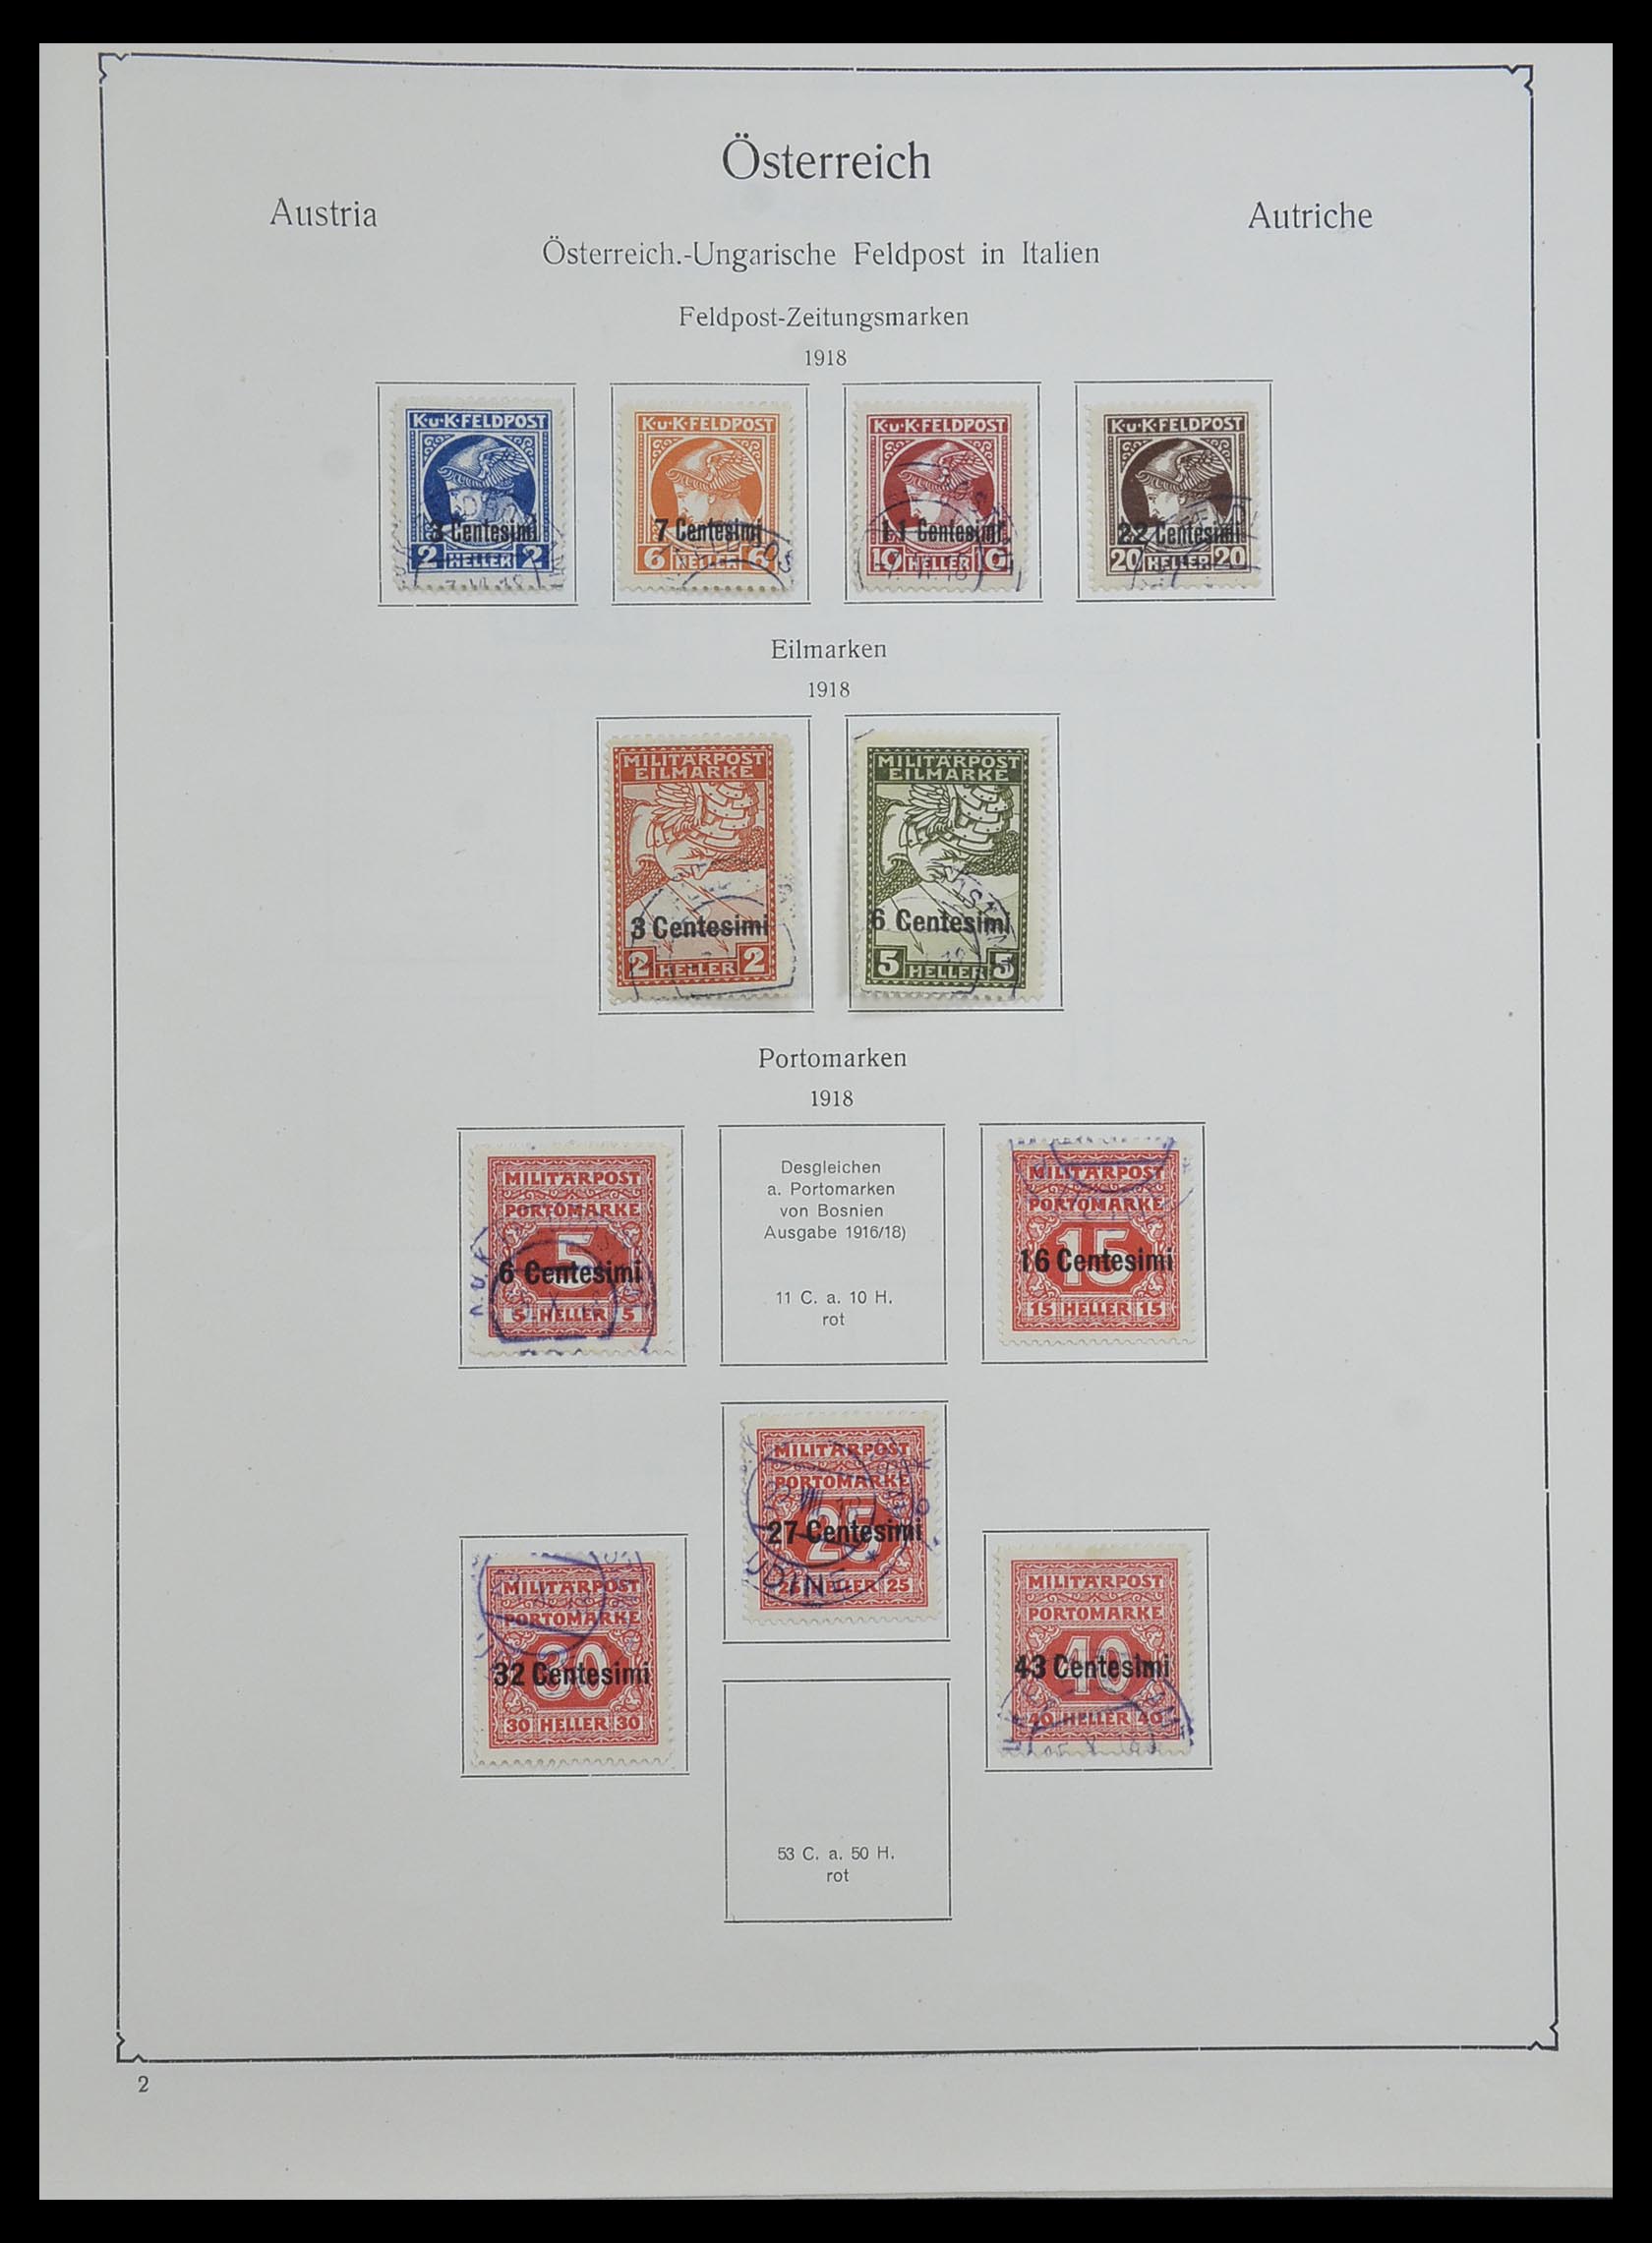 33594 017 - Stamp collection 33594 Austria and territories 1850-1918.